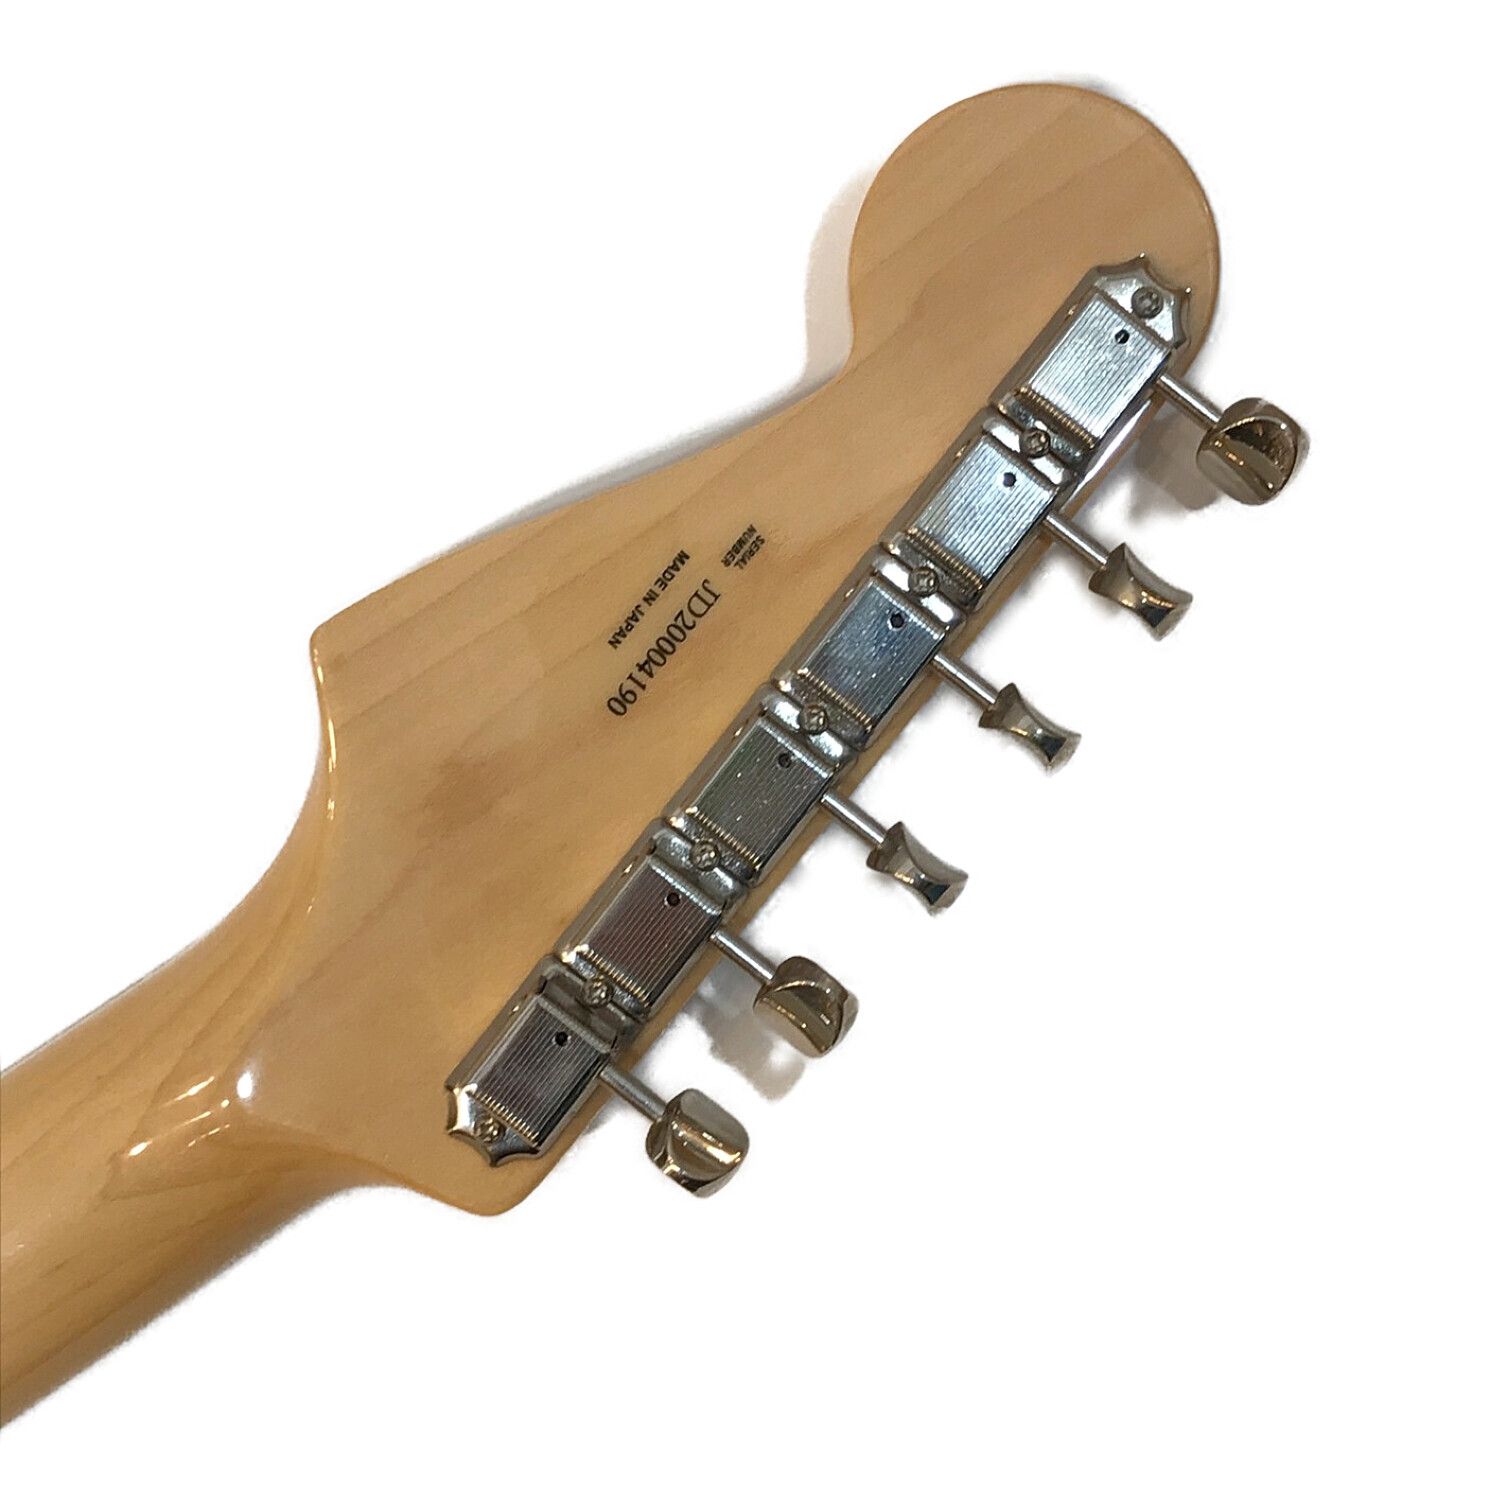 Fender JAPAN Stratocaster JD20 ギター エレキギター 弦楽器 